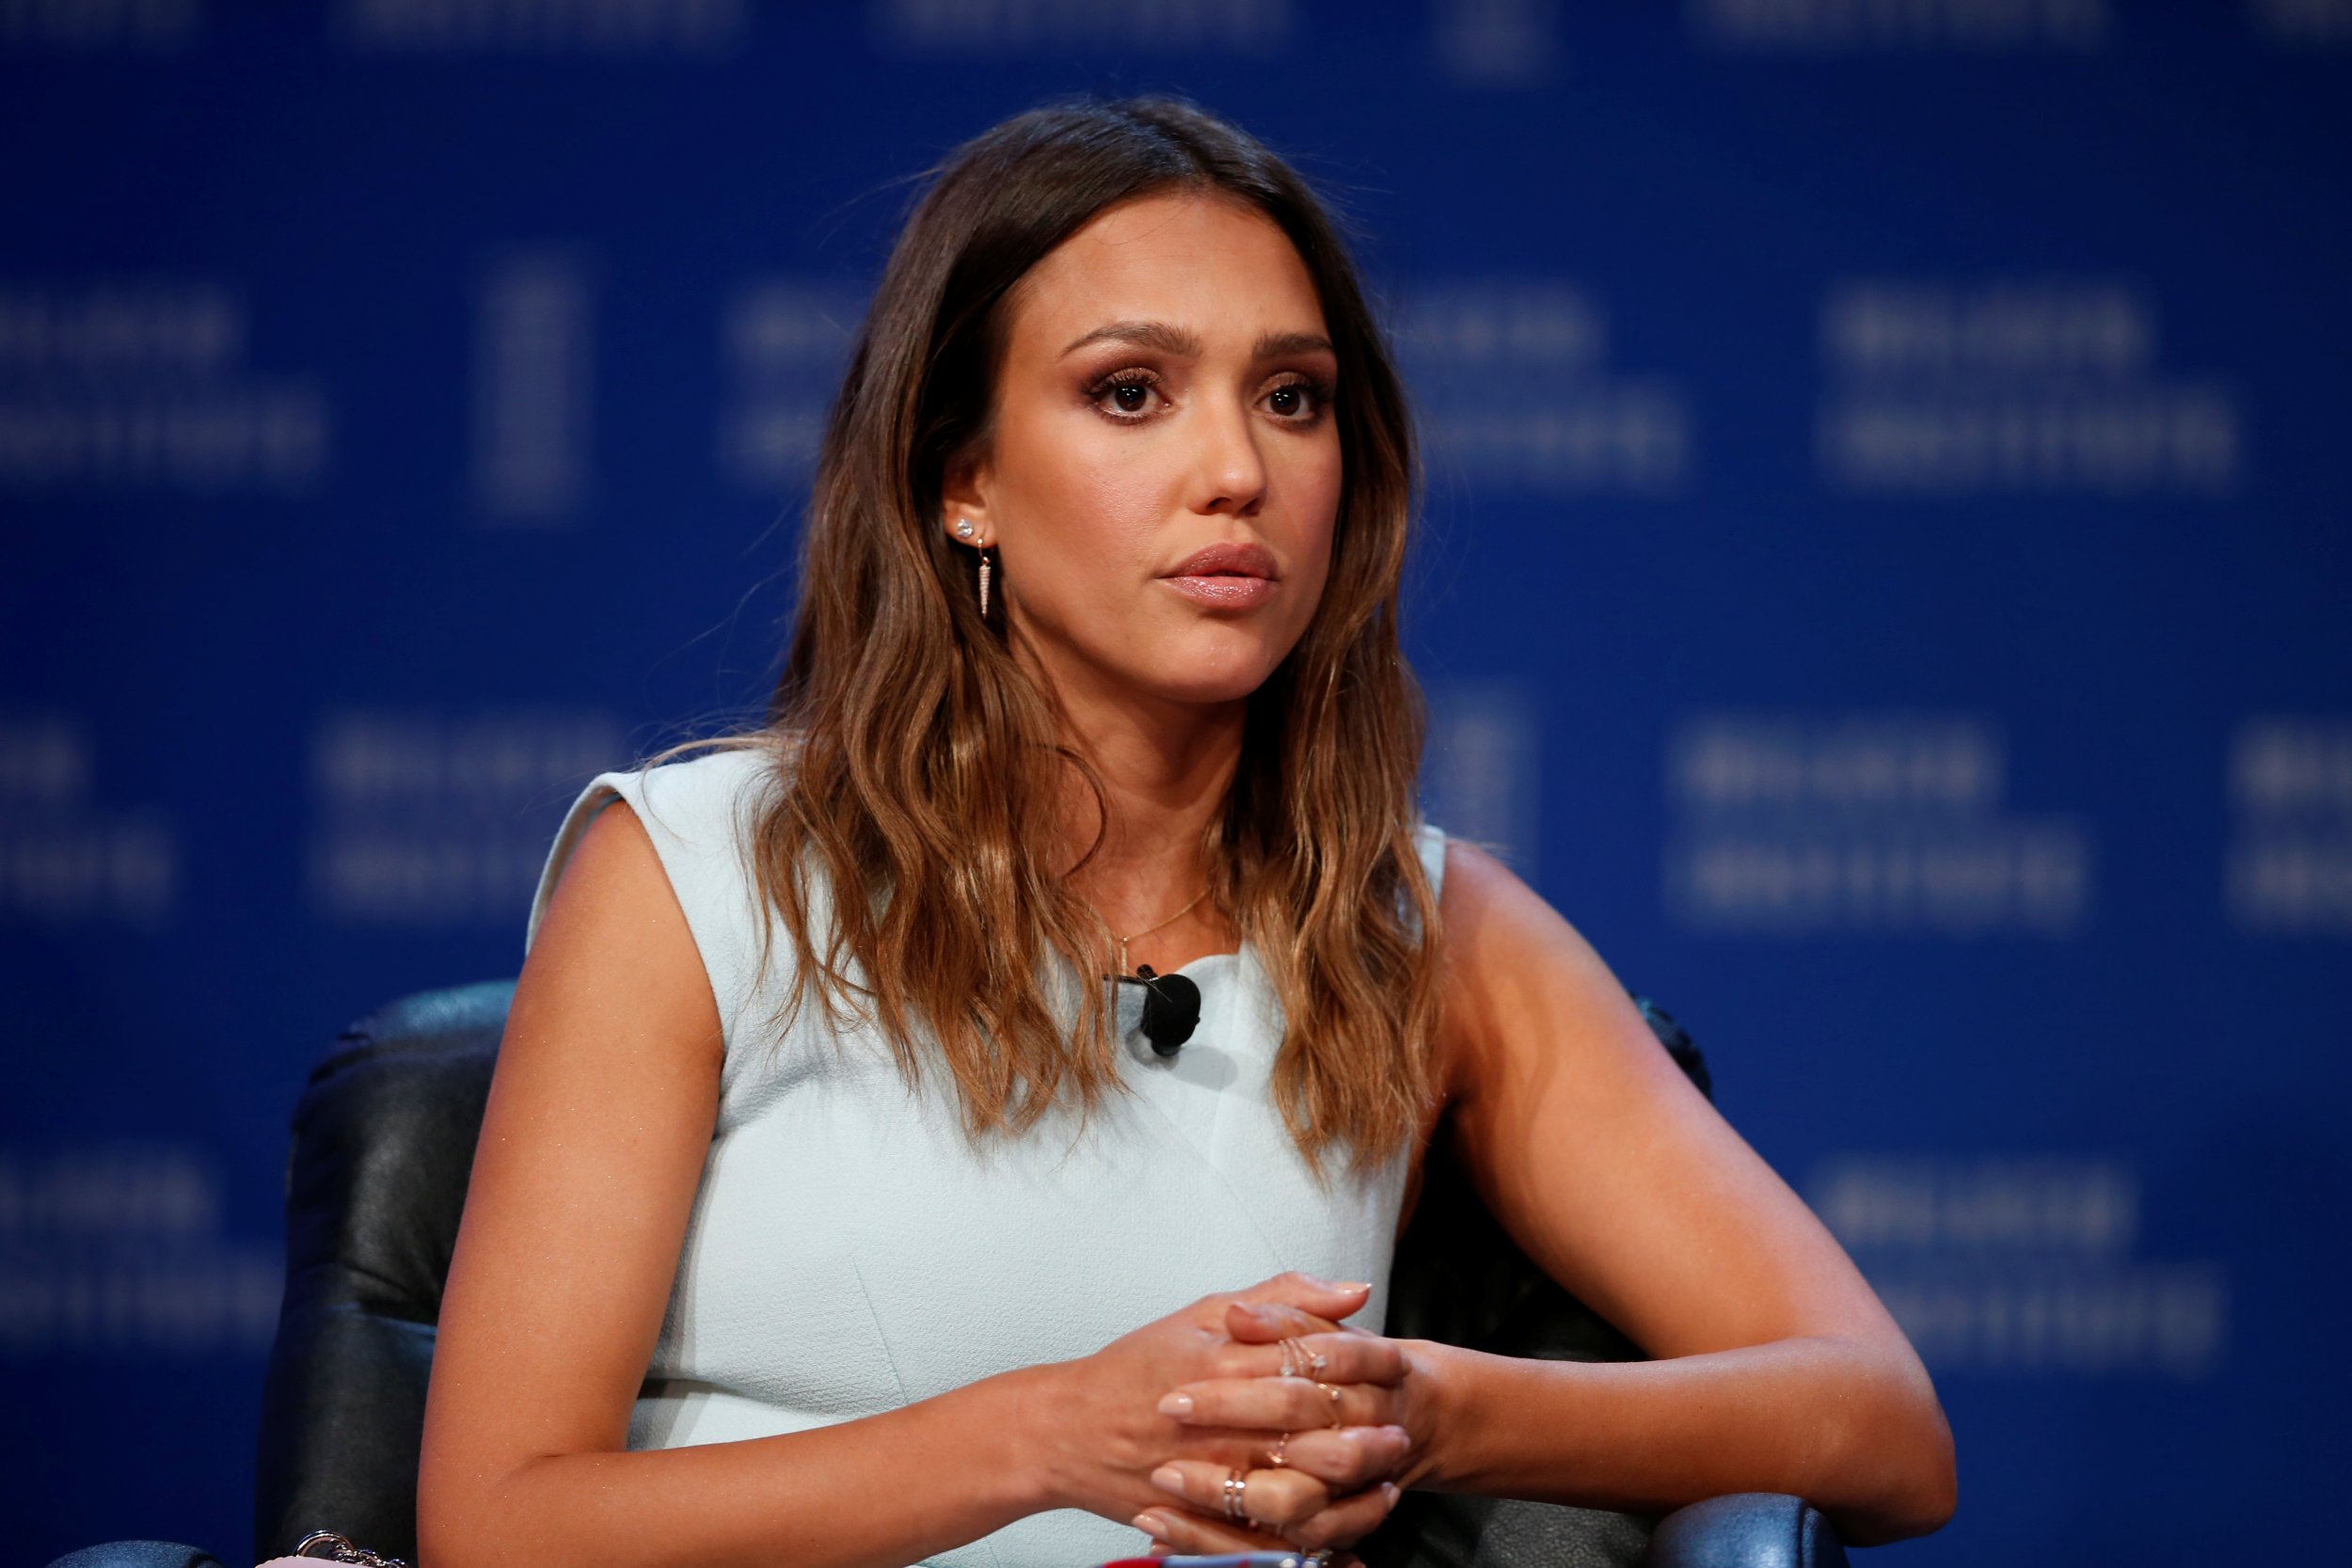 Jessica Alba And Daughter Honor Share The Cringiest Asmr Video With